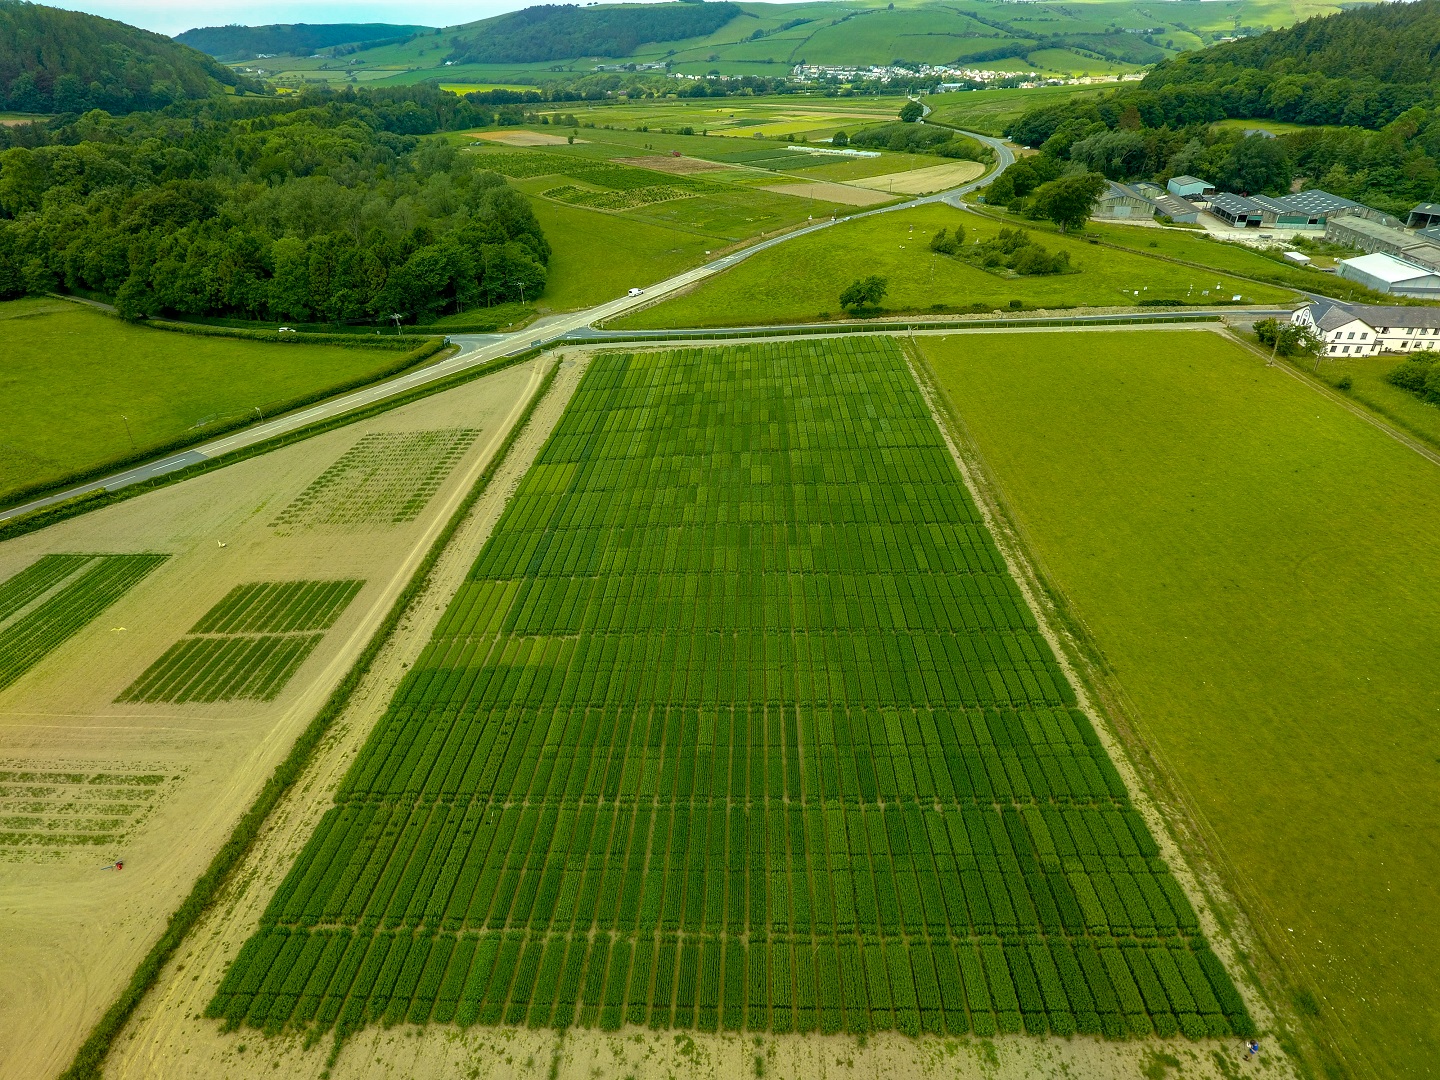 A field at IBERS where oats are grown for research purposes